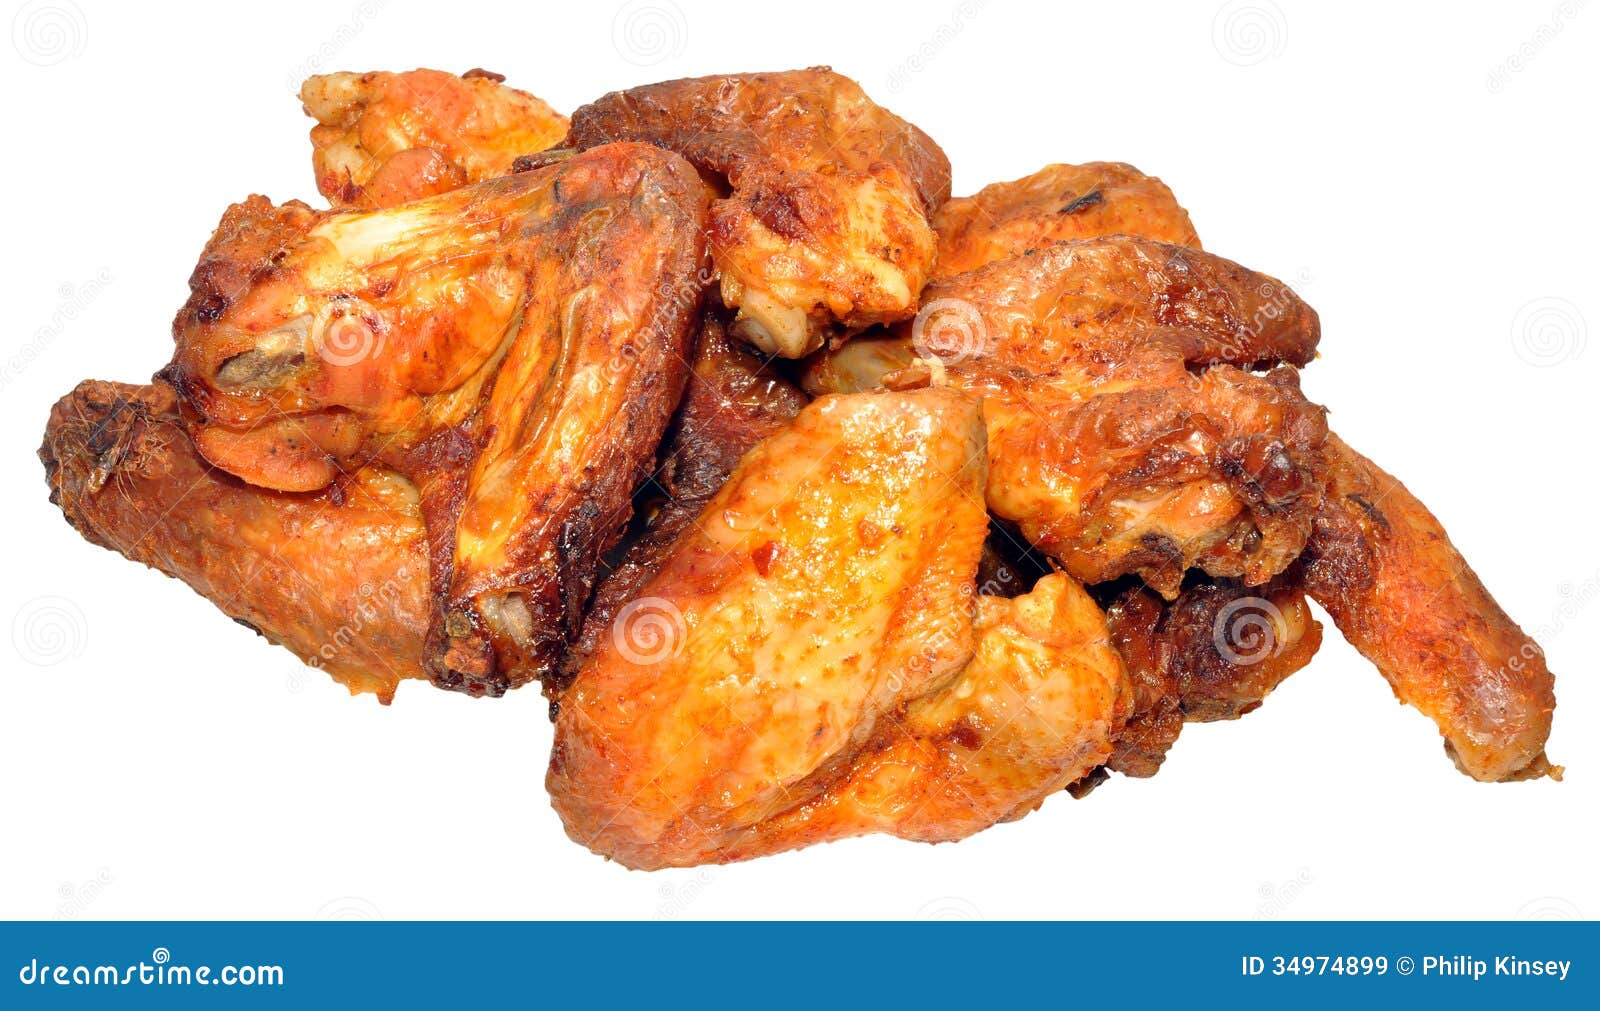 free clip art of chicken wings - photo #45